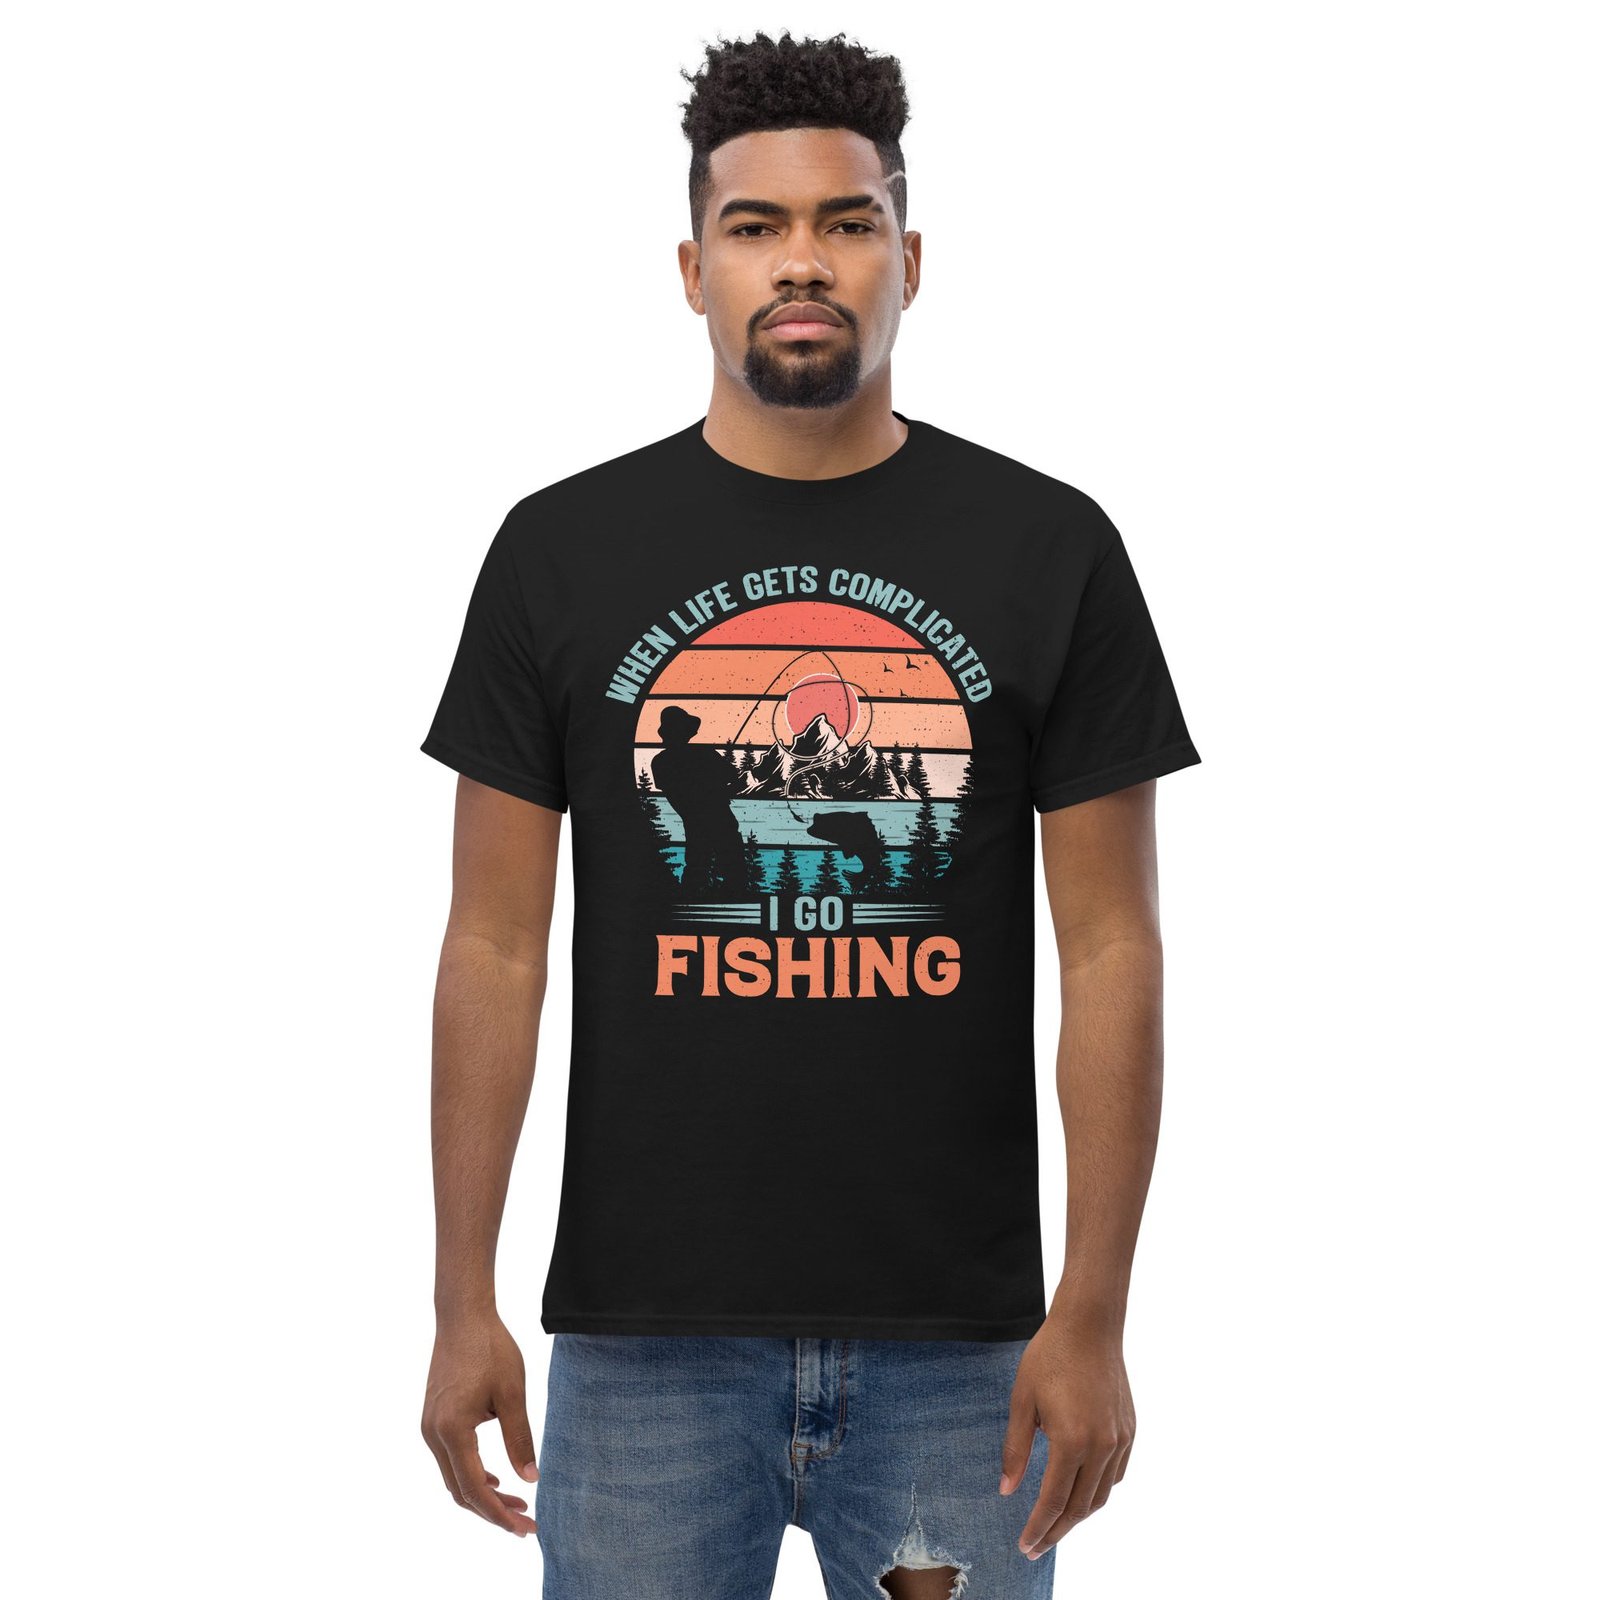 When life gets compliacted I go fishing Men's classic tee